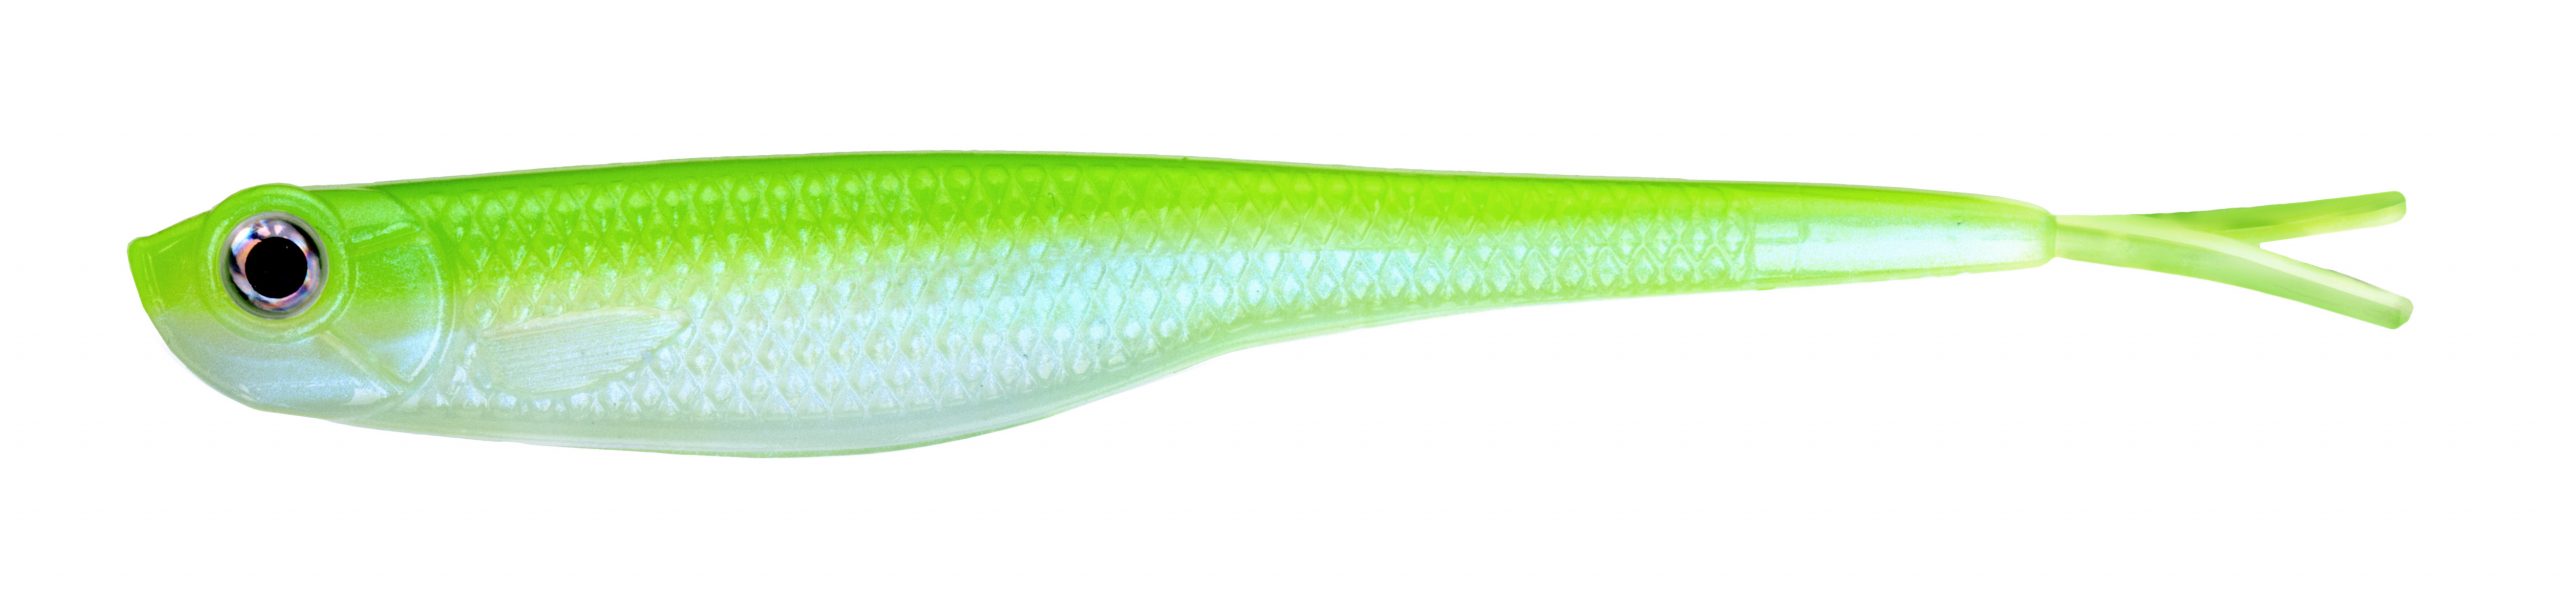 Fat Cow Finesse Baits Fat Shad 5" - 6 Pack